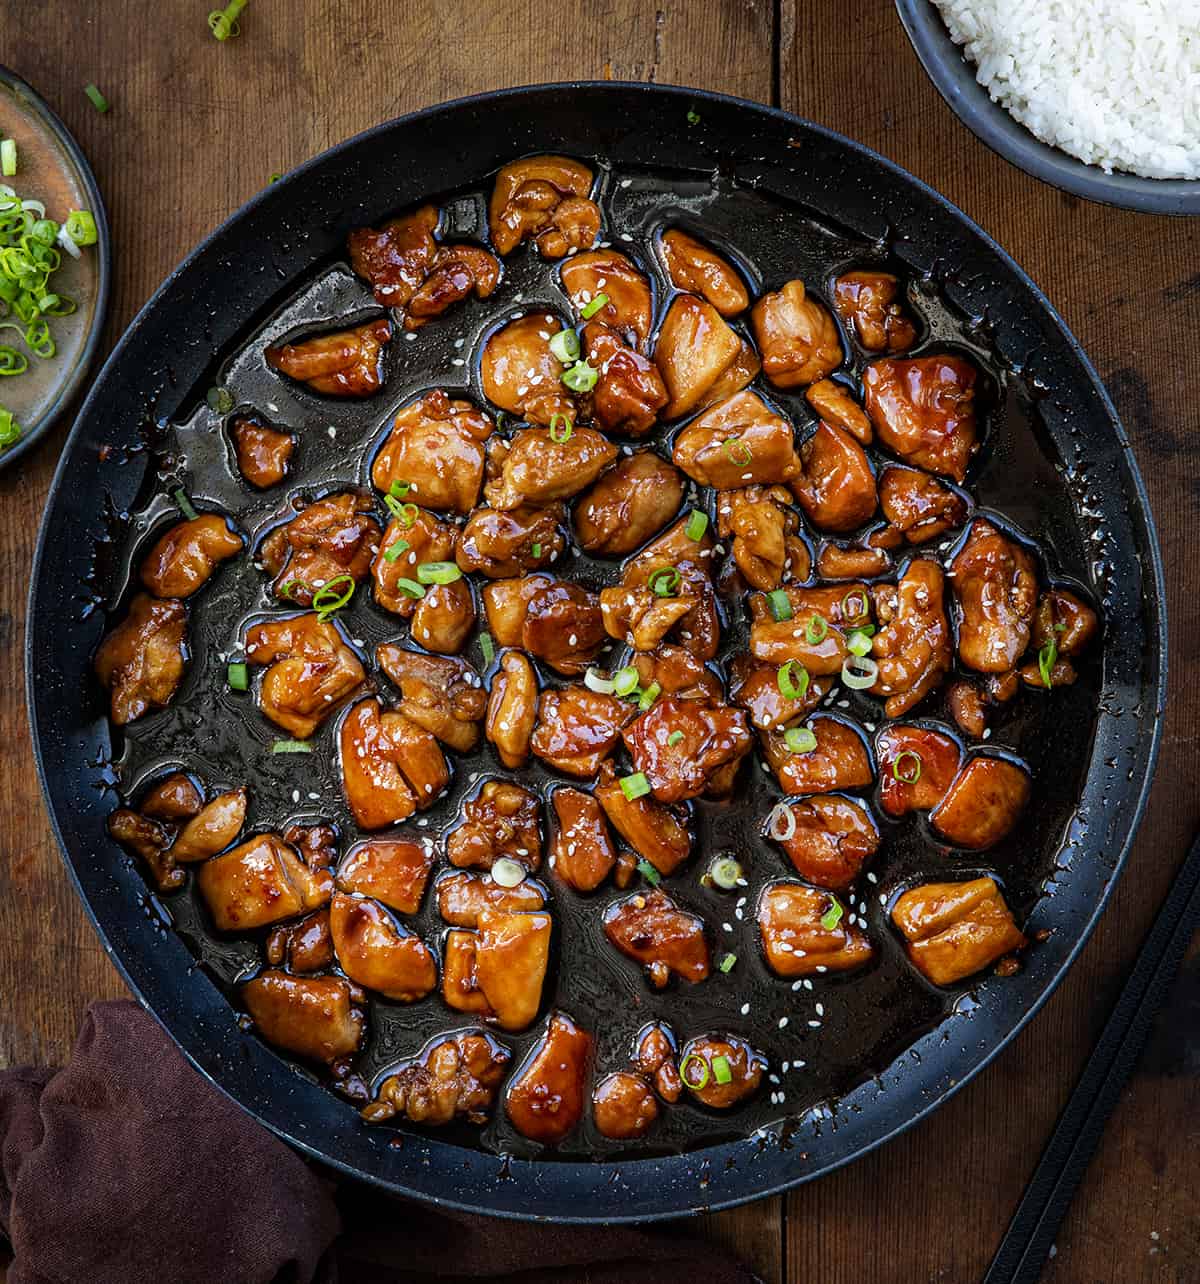 Bourbon Chicken in a skillet on a wooden table from overhead.